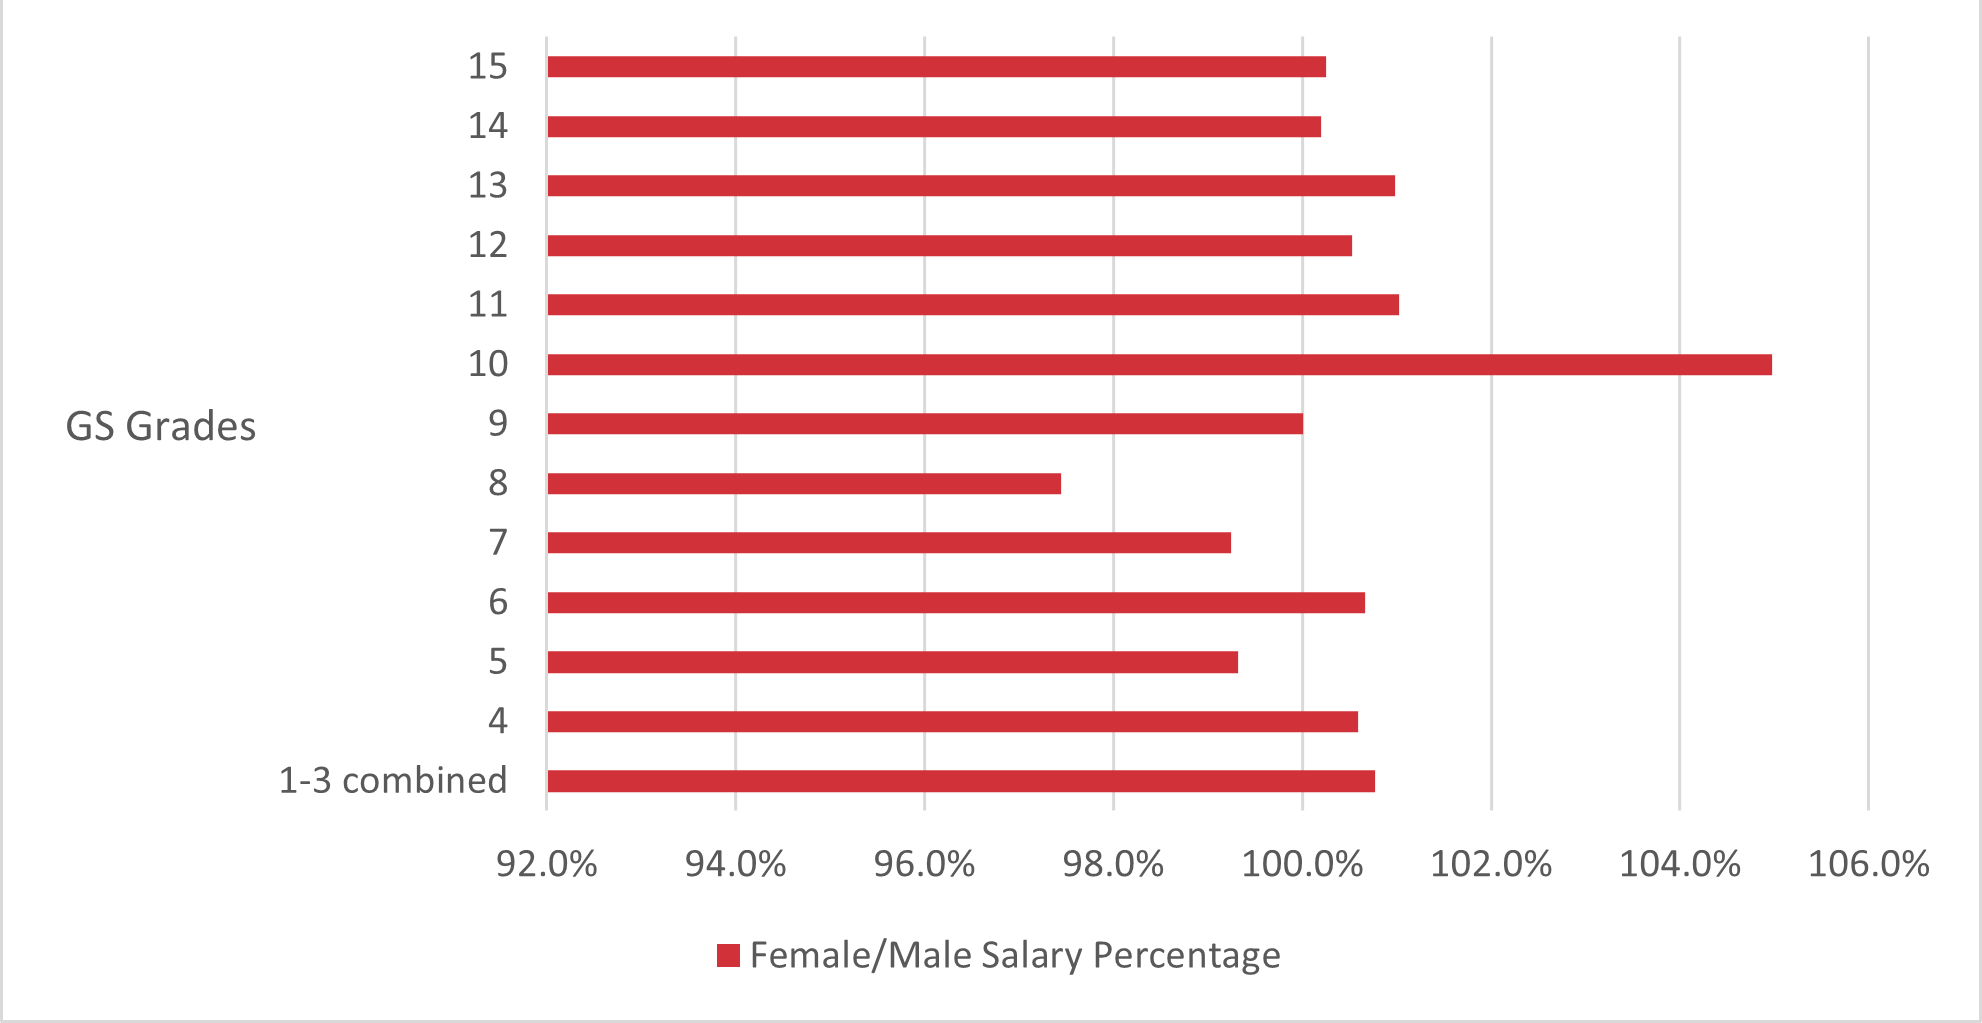 Female/Male Salary Percentage for GS Grades bar graph. Full text description in the table 3c.